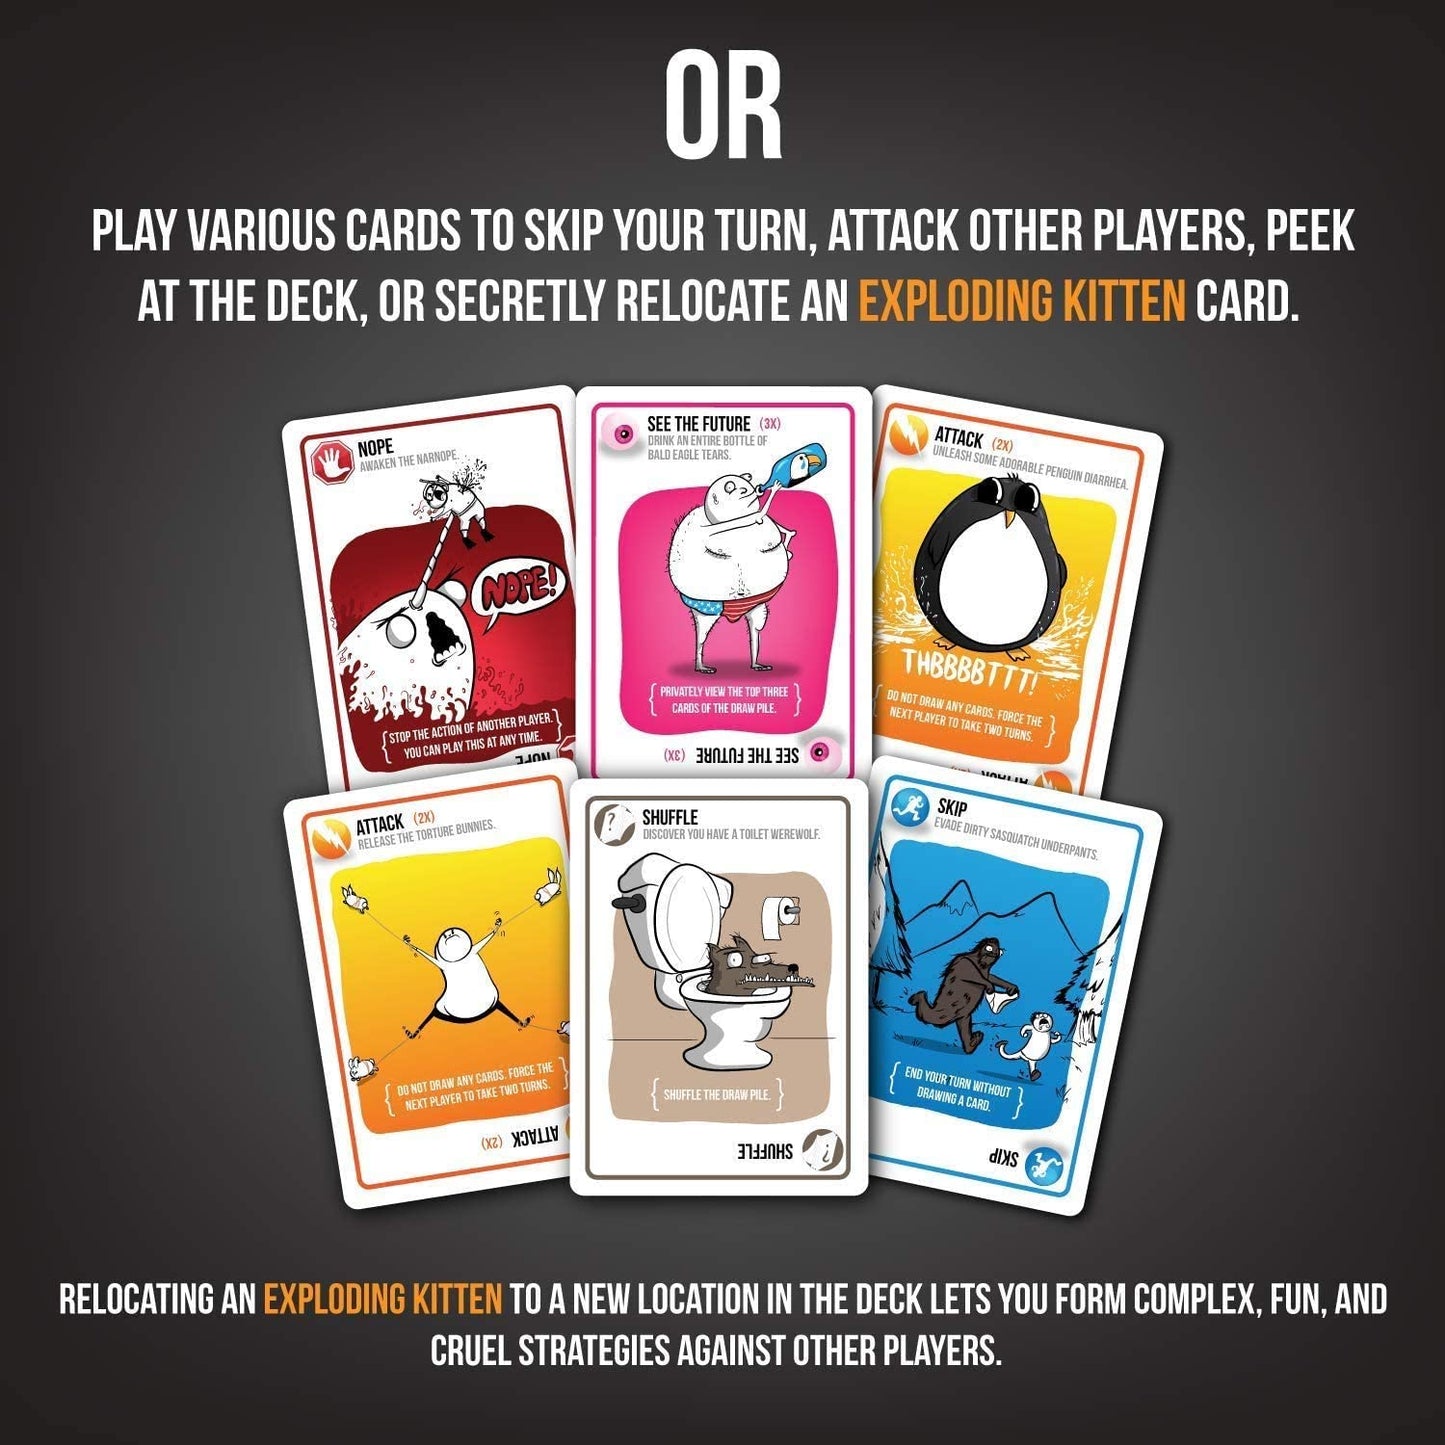 Exploding Kittens NSFW Edition (Adults 18+)